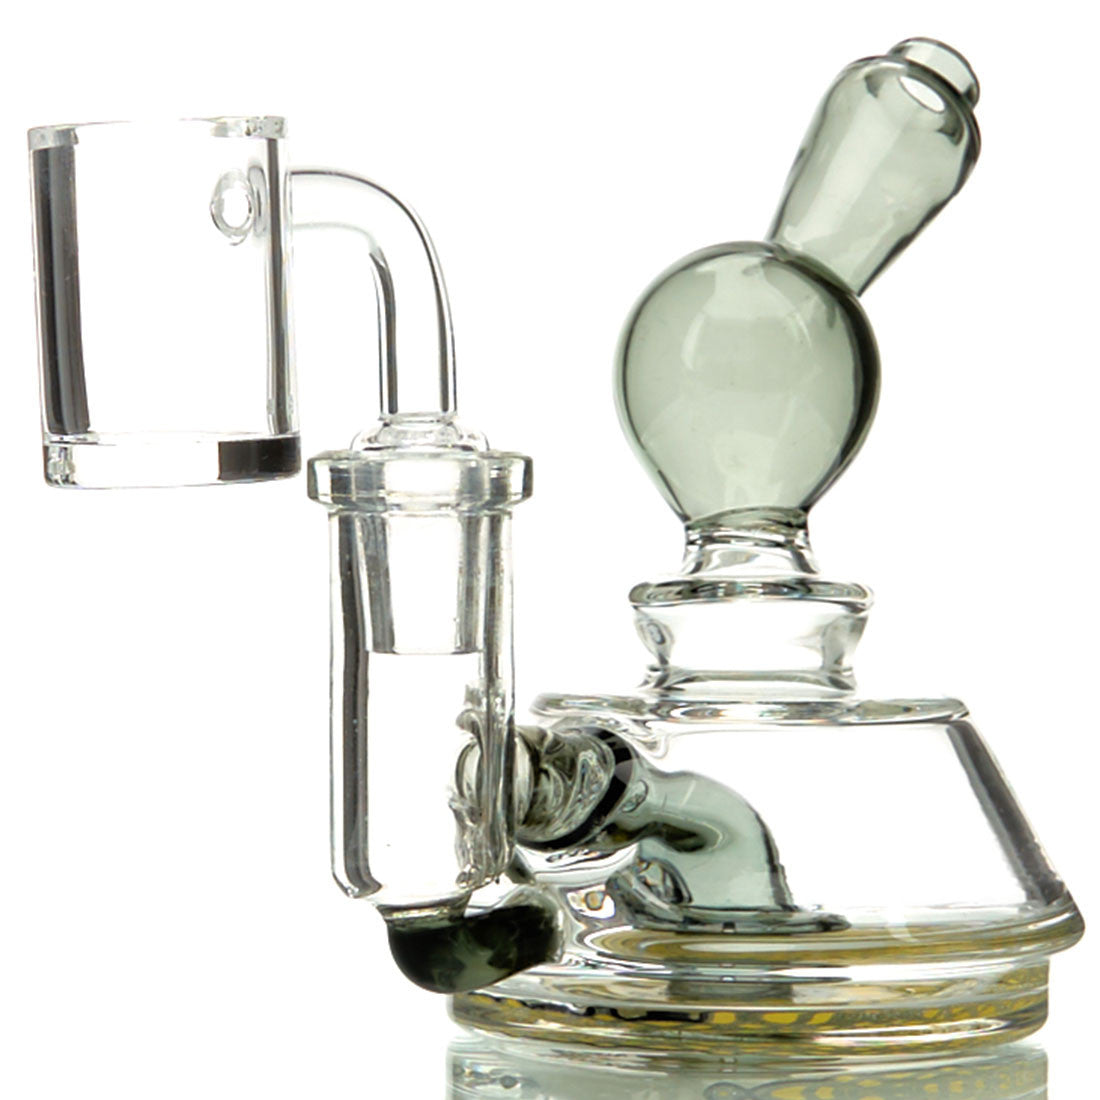 Olympus Plato Dab Rig with colored borosilicate glass and perc 6